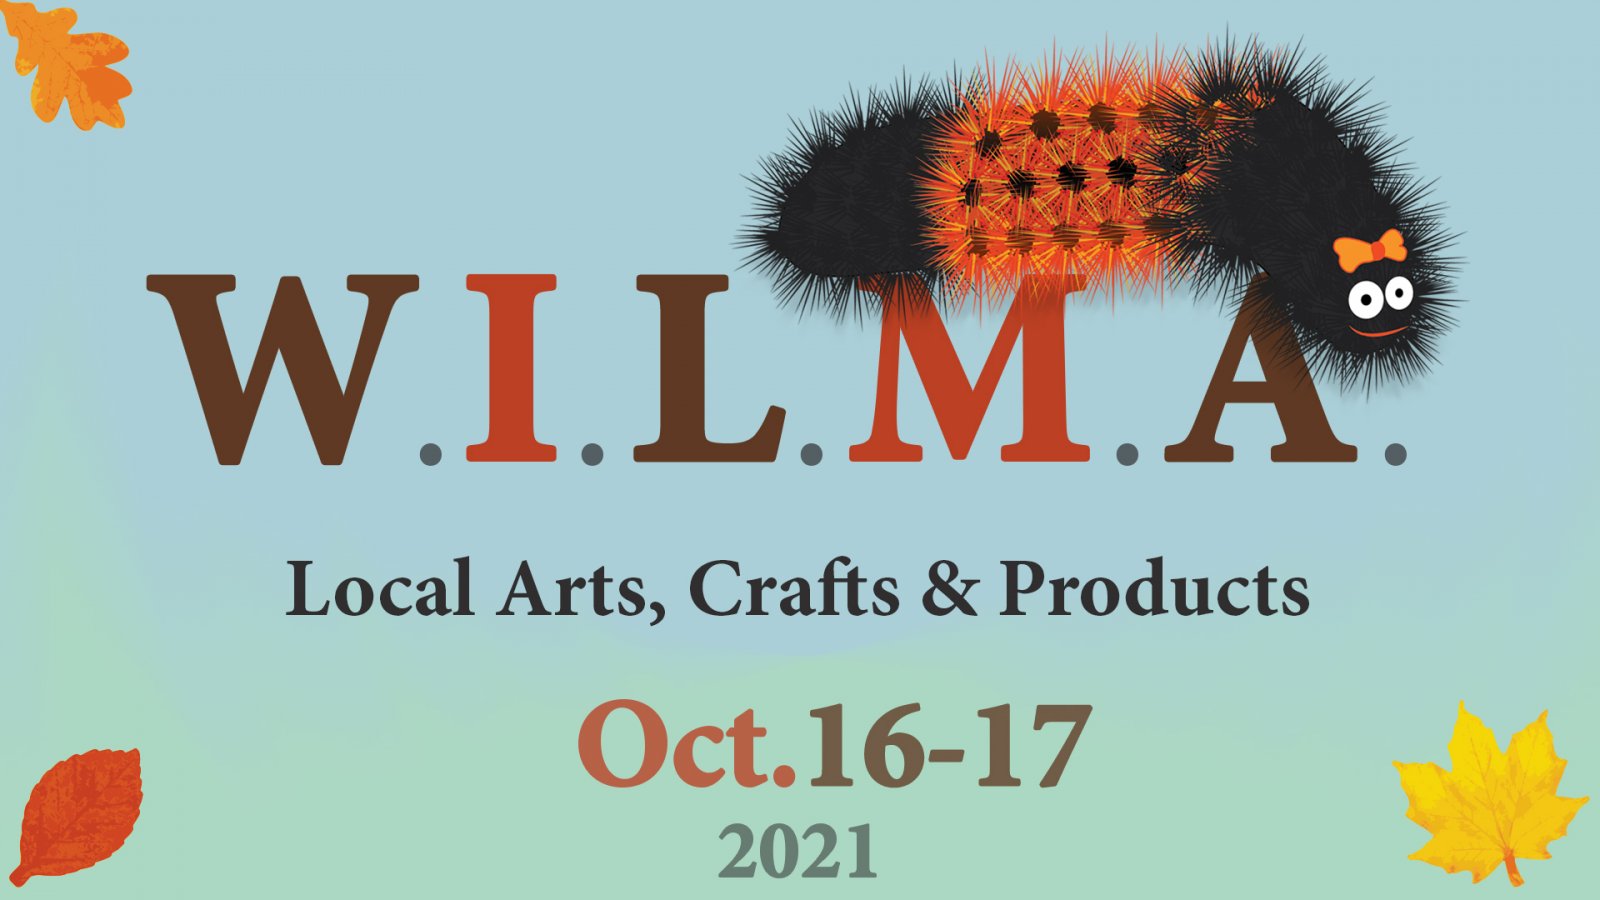 WILMA Local arts, crafts and products October 16-17, 2021